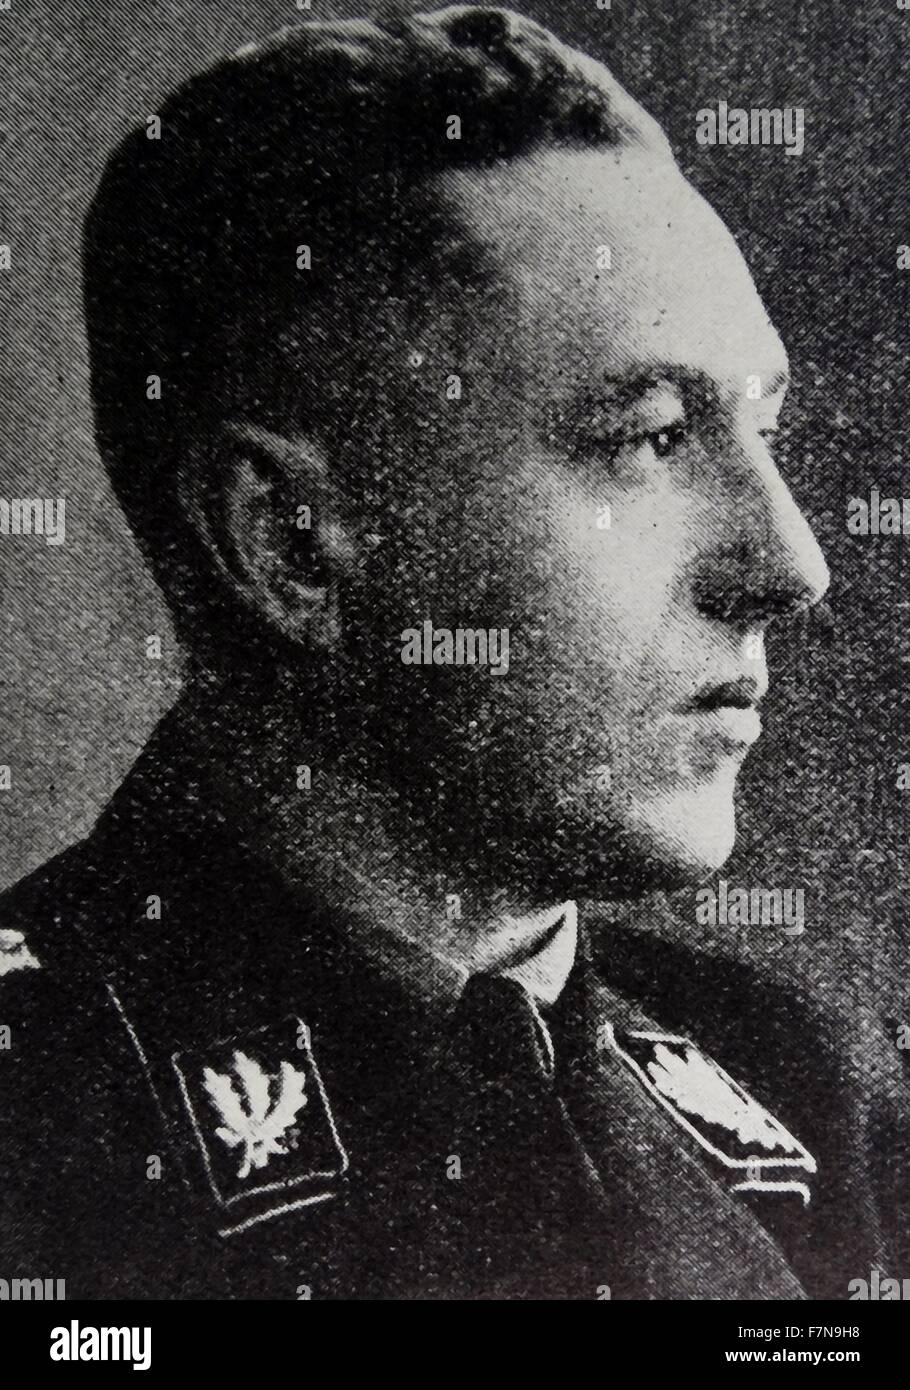 Photograph of Albert Forster (1902-1952) a Nazi German politician and served as the Gauleiter of Danzig-West Prussia during the Second World War. Forster was hanged for his crimes after Germany was defeated. Dated 1940 Stock Photo